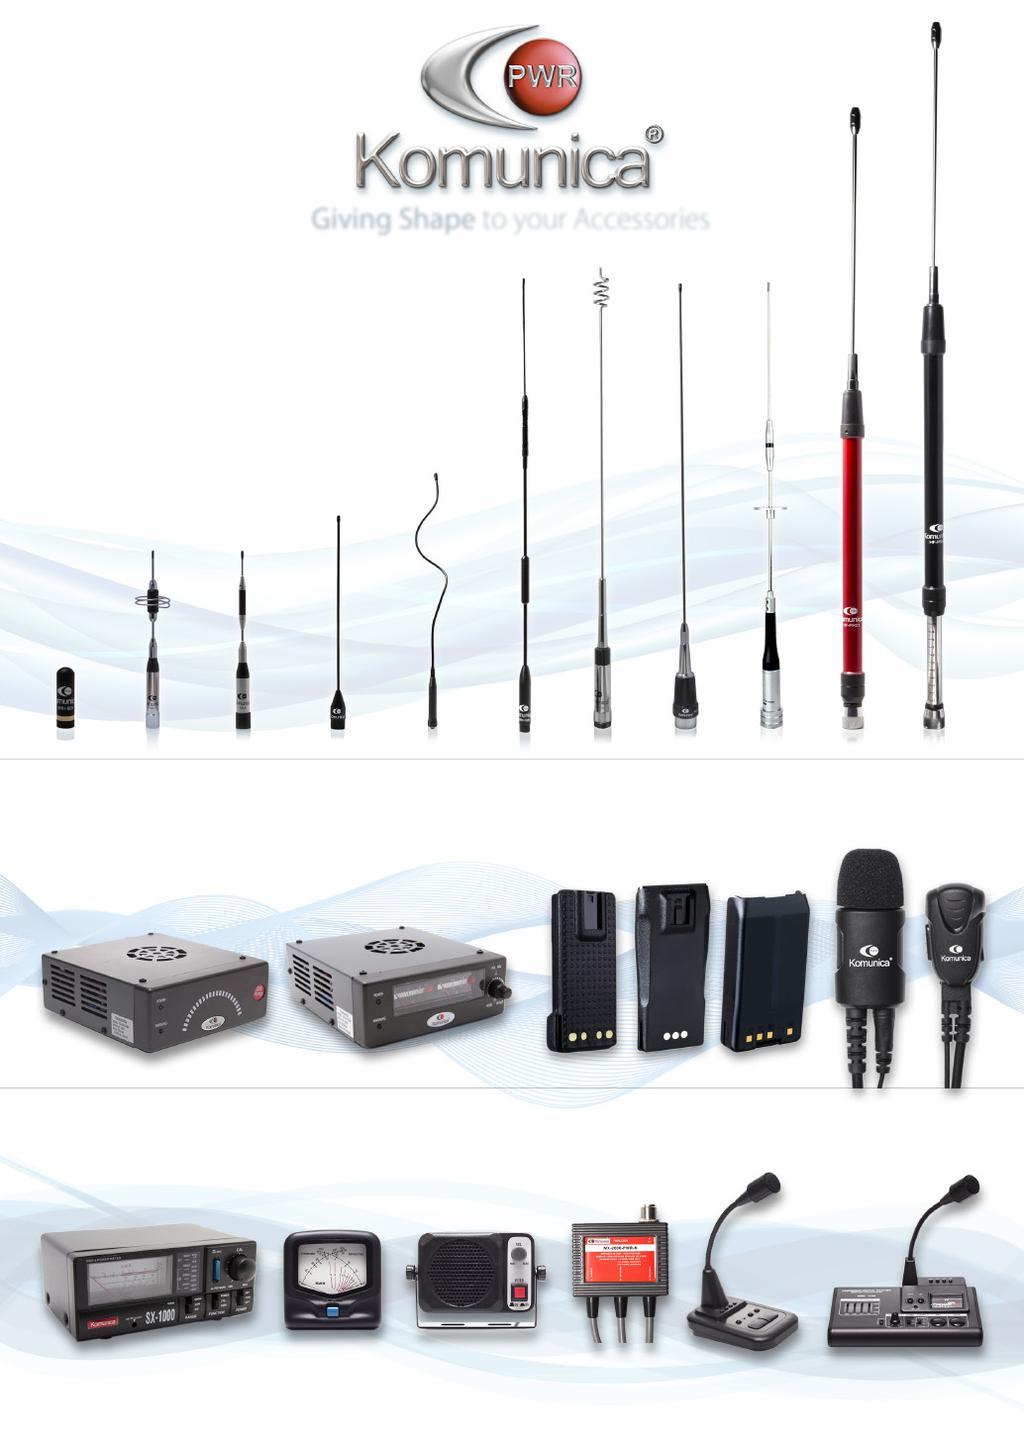 Wide Range of Professional & HAM Radio Antennas Giving Shape to your Accessories HF-PRO-1 Portable Antenna Wide Band